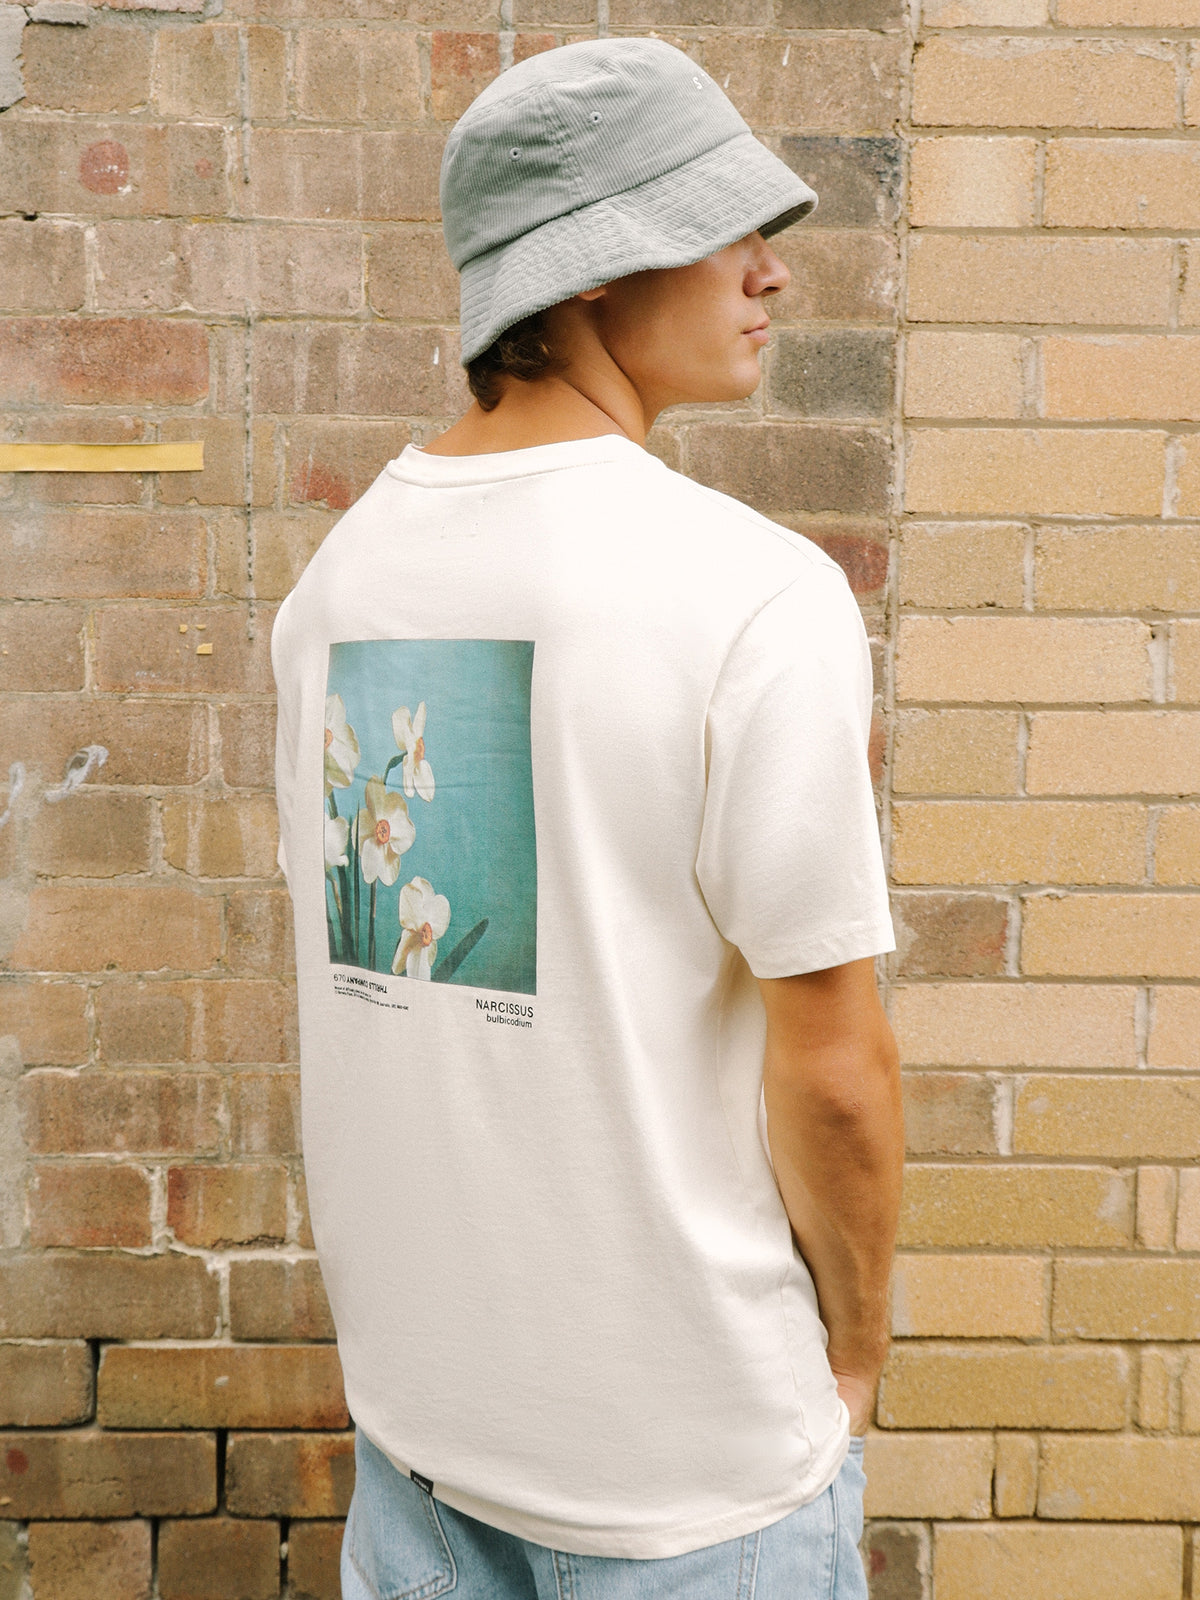 Narcissus Merch Fit T-Shirt in White